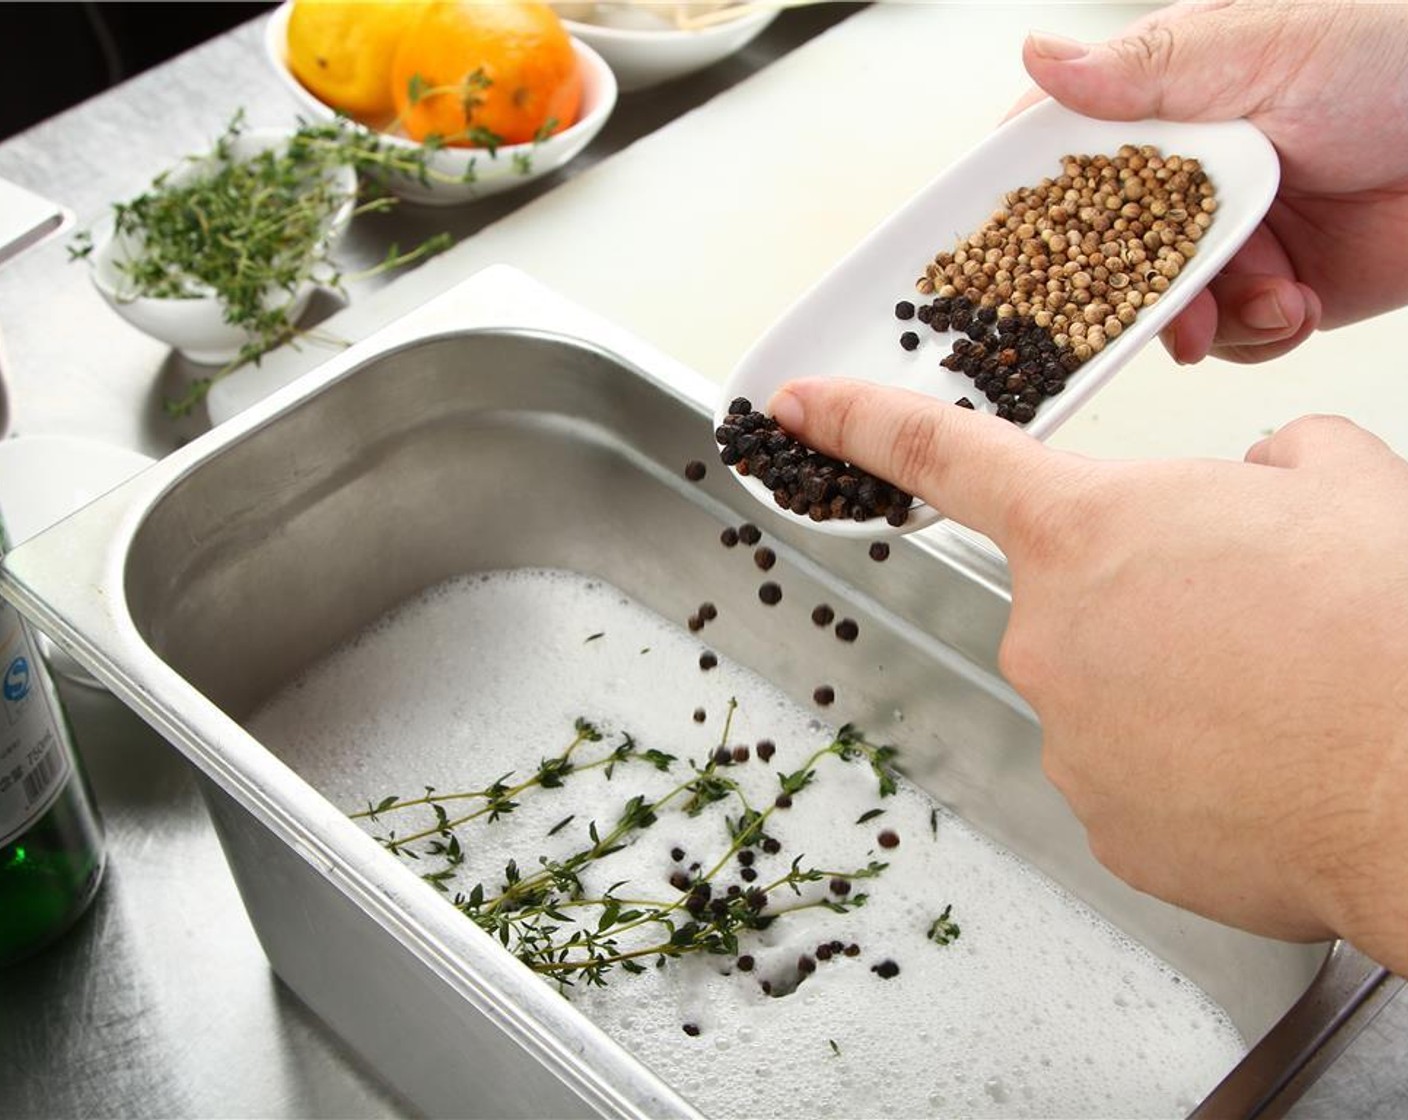 step 2 Place blender contents in a large non-reactive container, add remainder of water, Fresh Thyme (1/2 Tbsp), Bay Leaves (2), and Black Peppercorns (1/2 Tbsp).